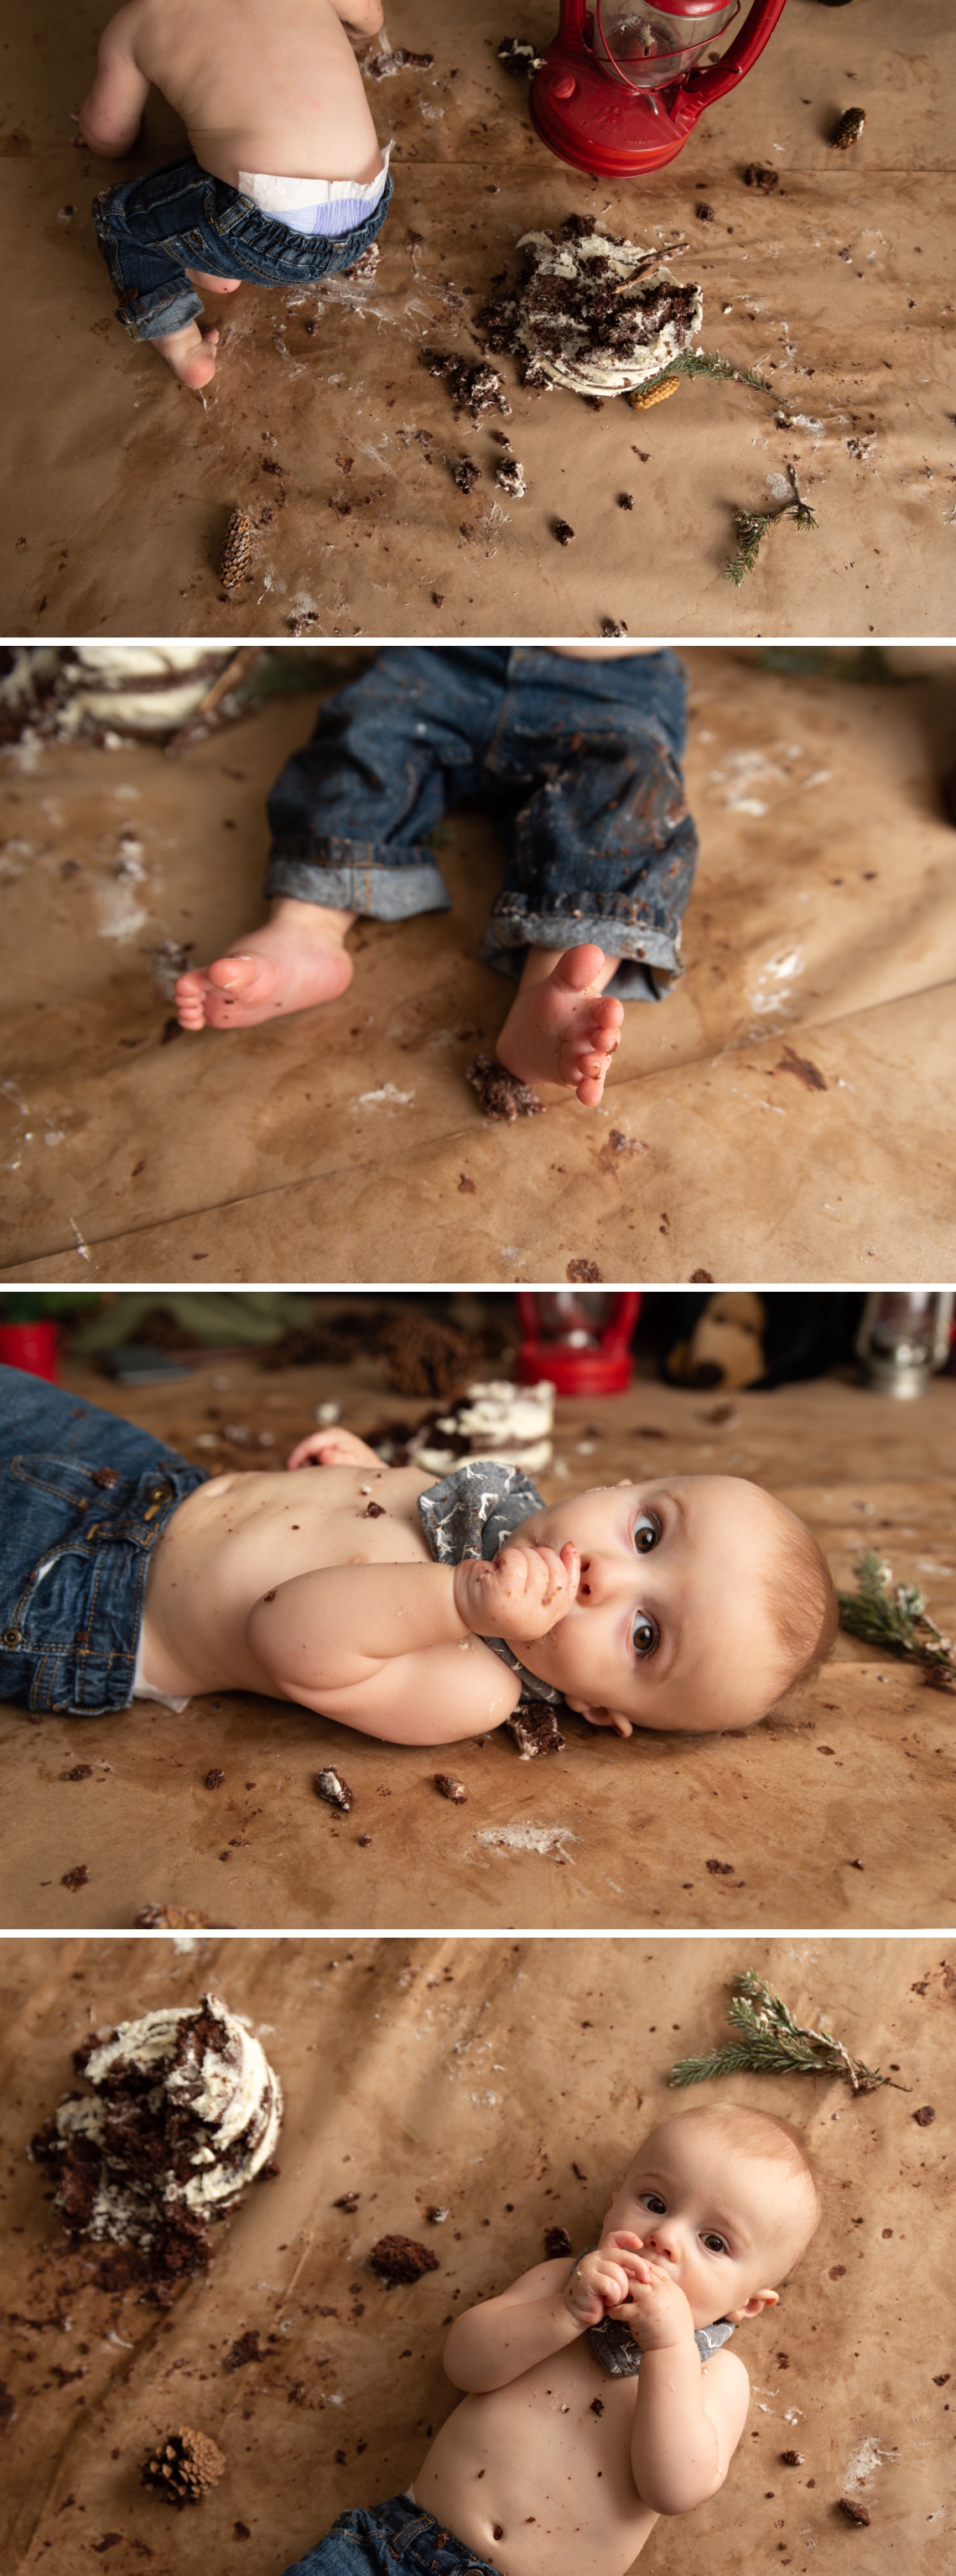 Cake smash with baby covered in cake